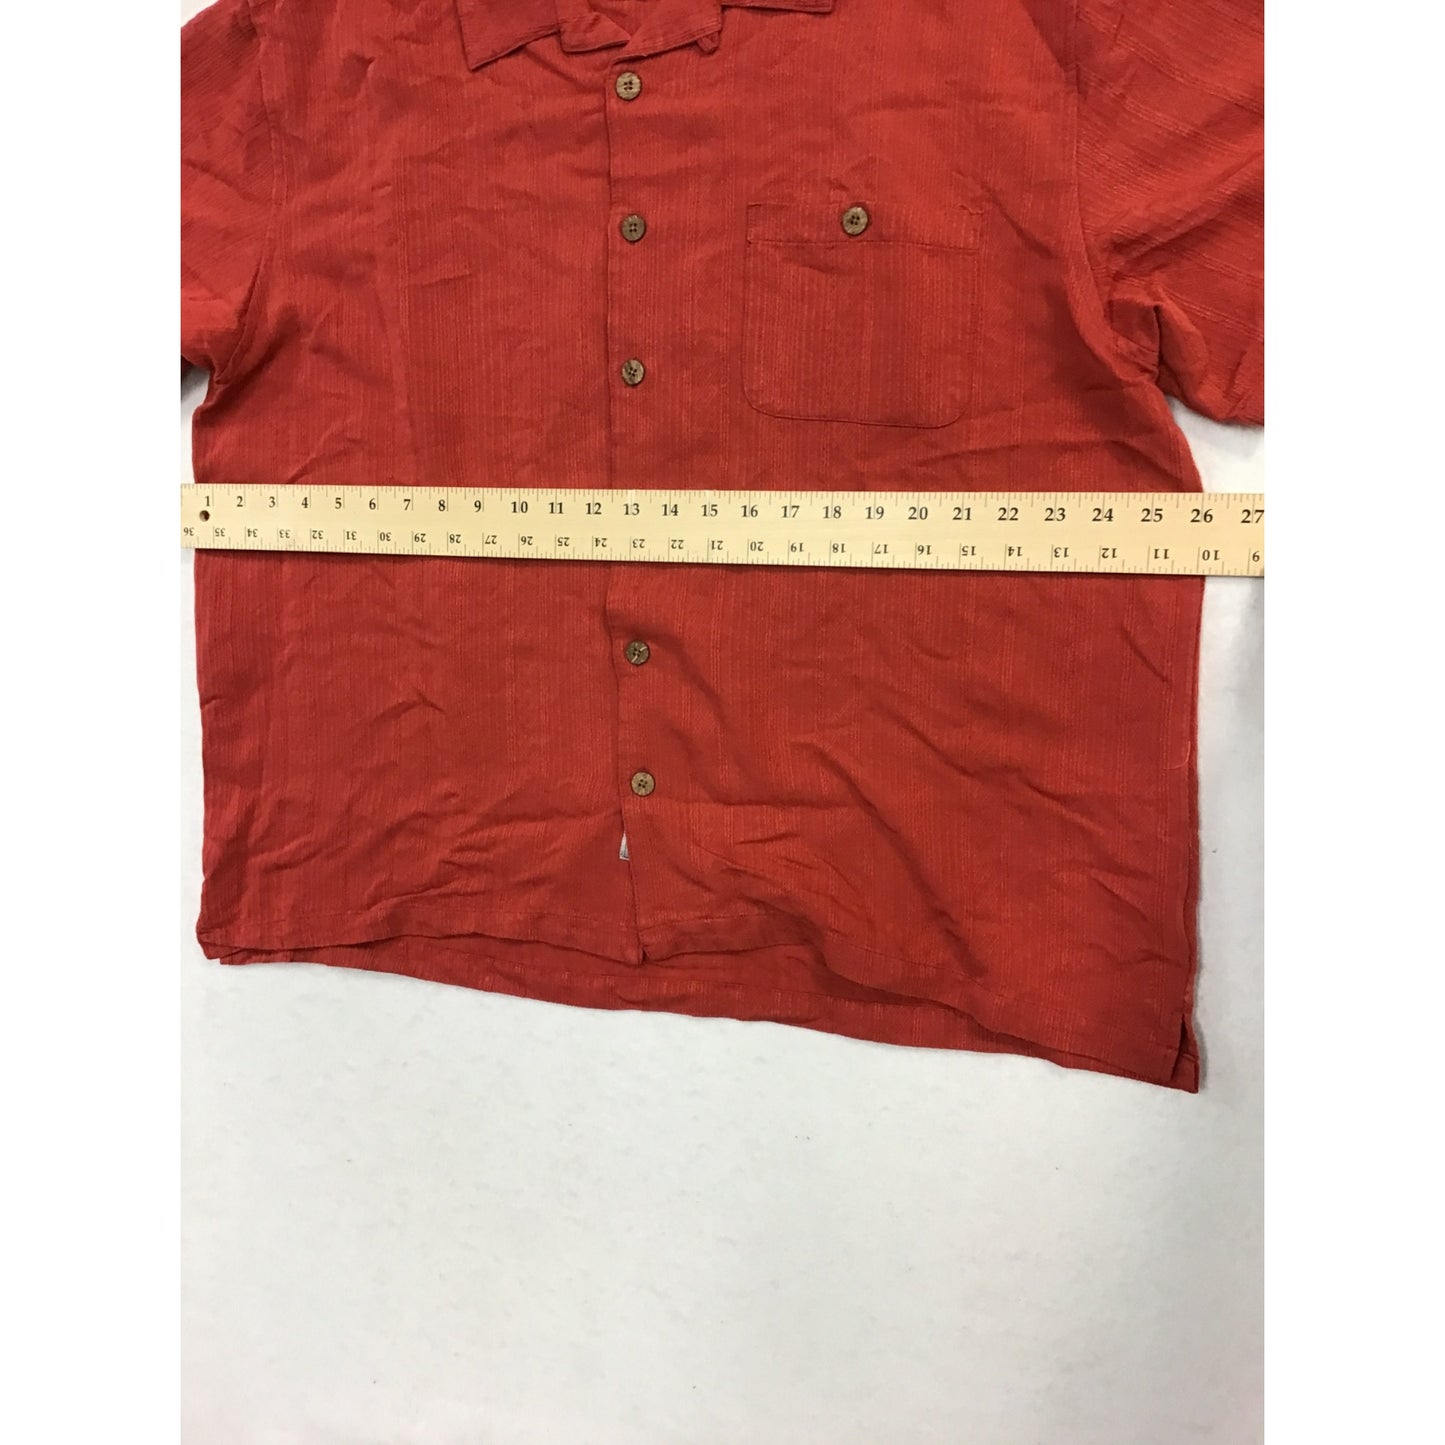 Mens button up tee